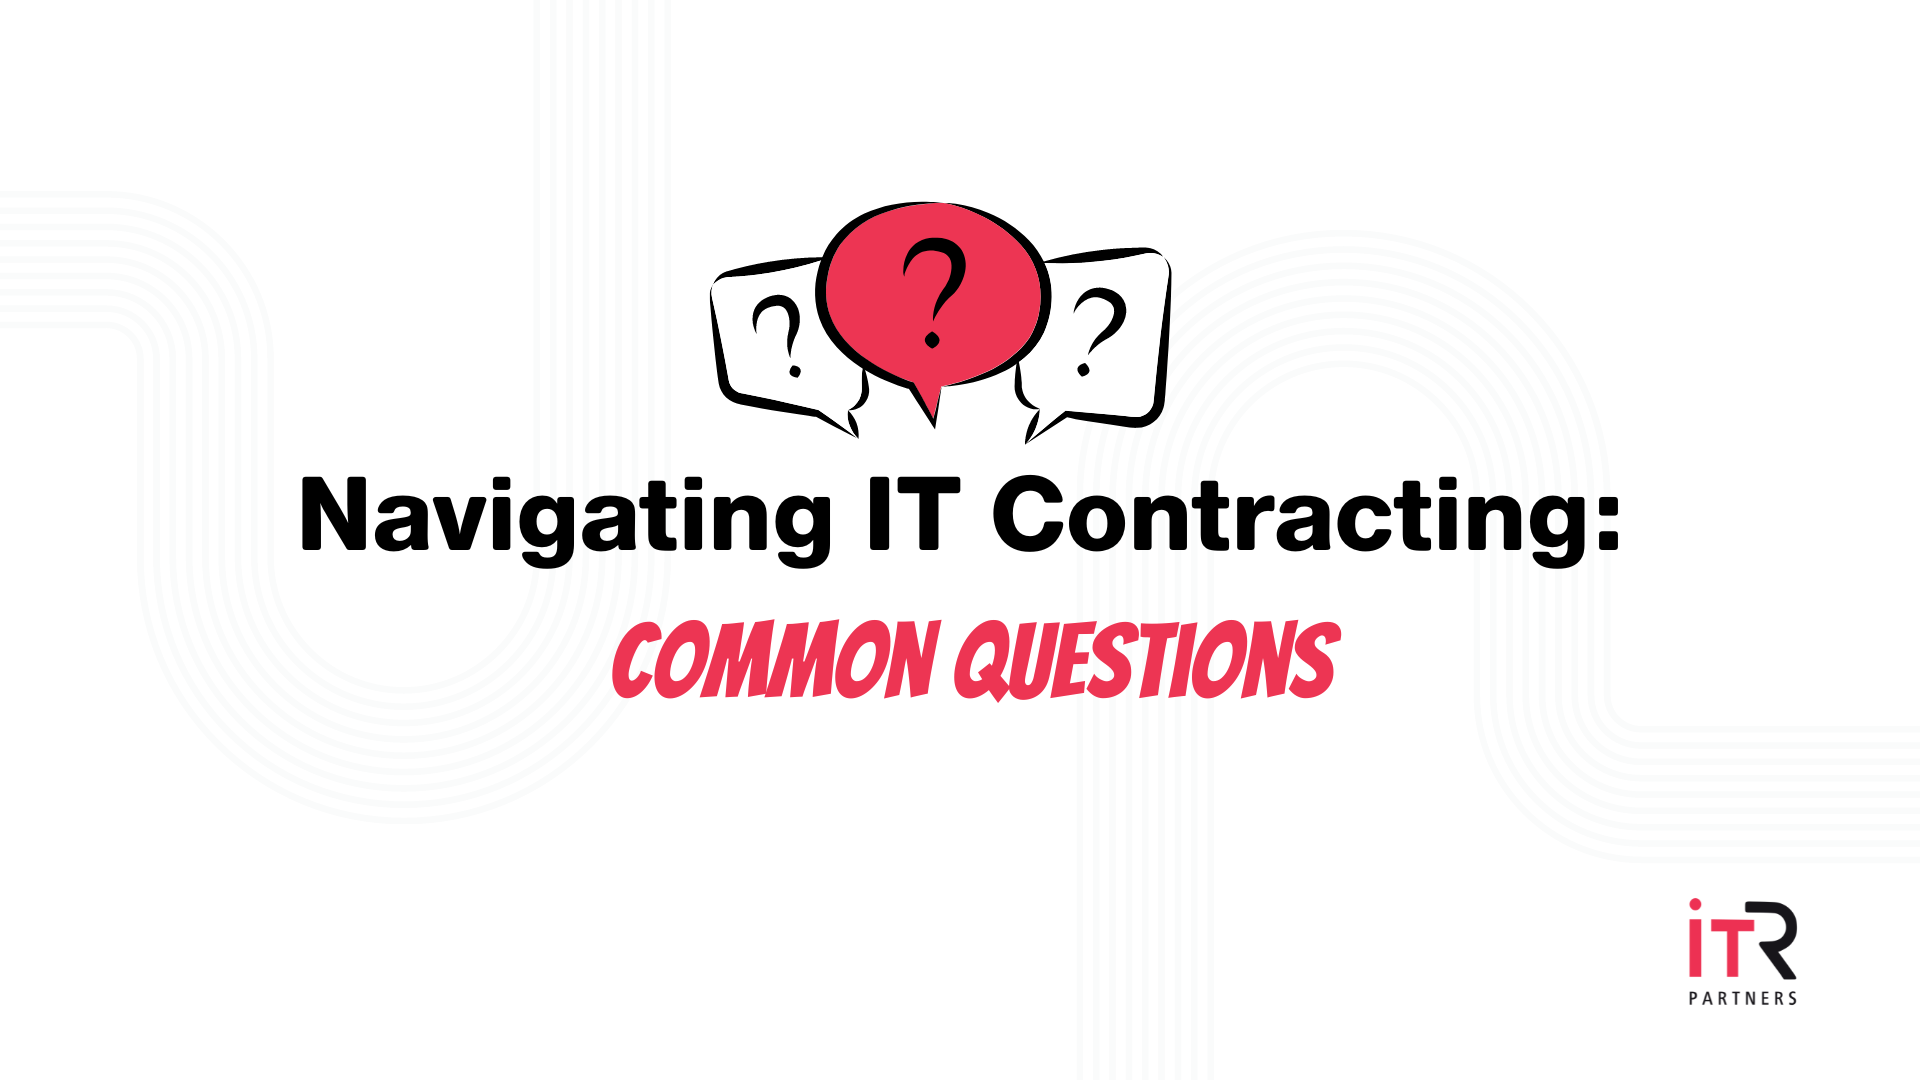 Navigating IT Contracting: Common Questions